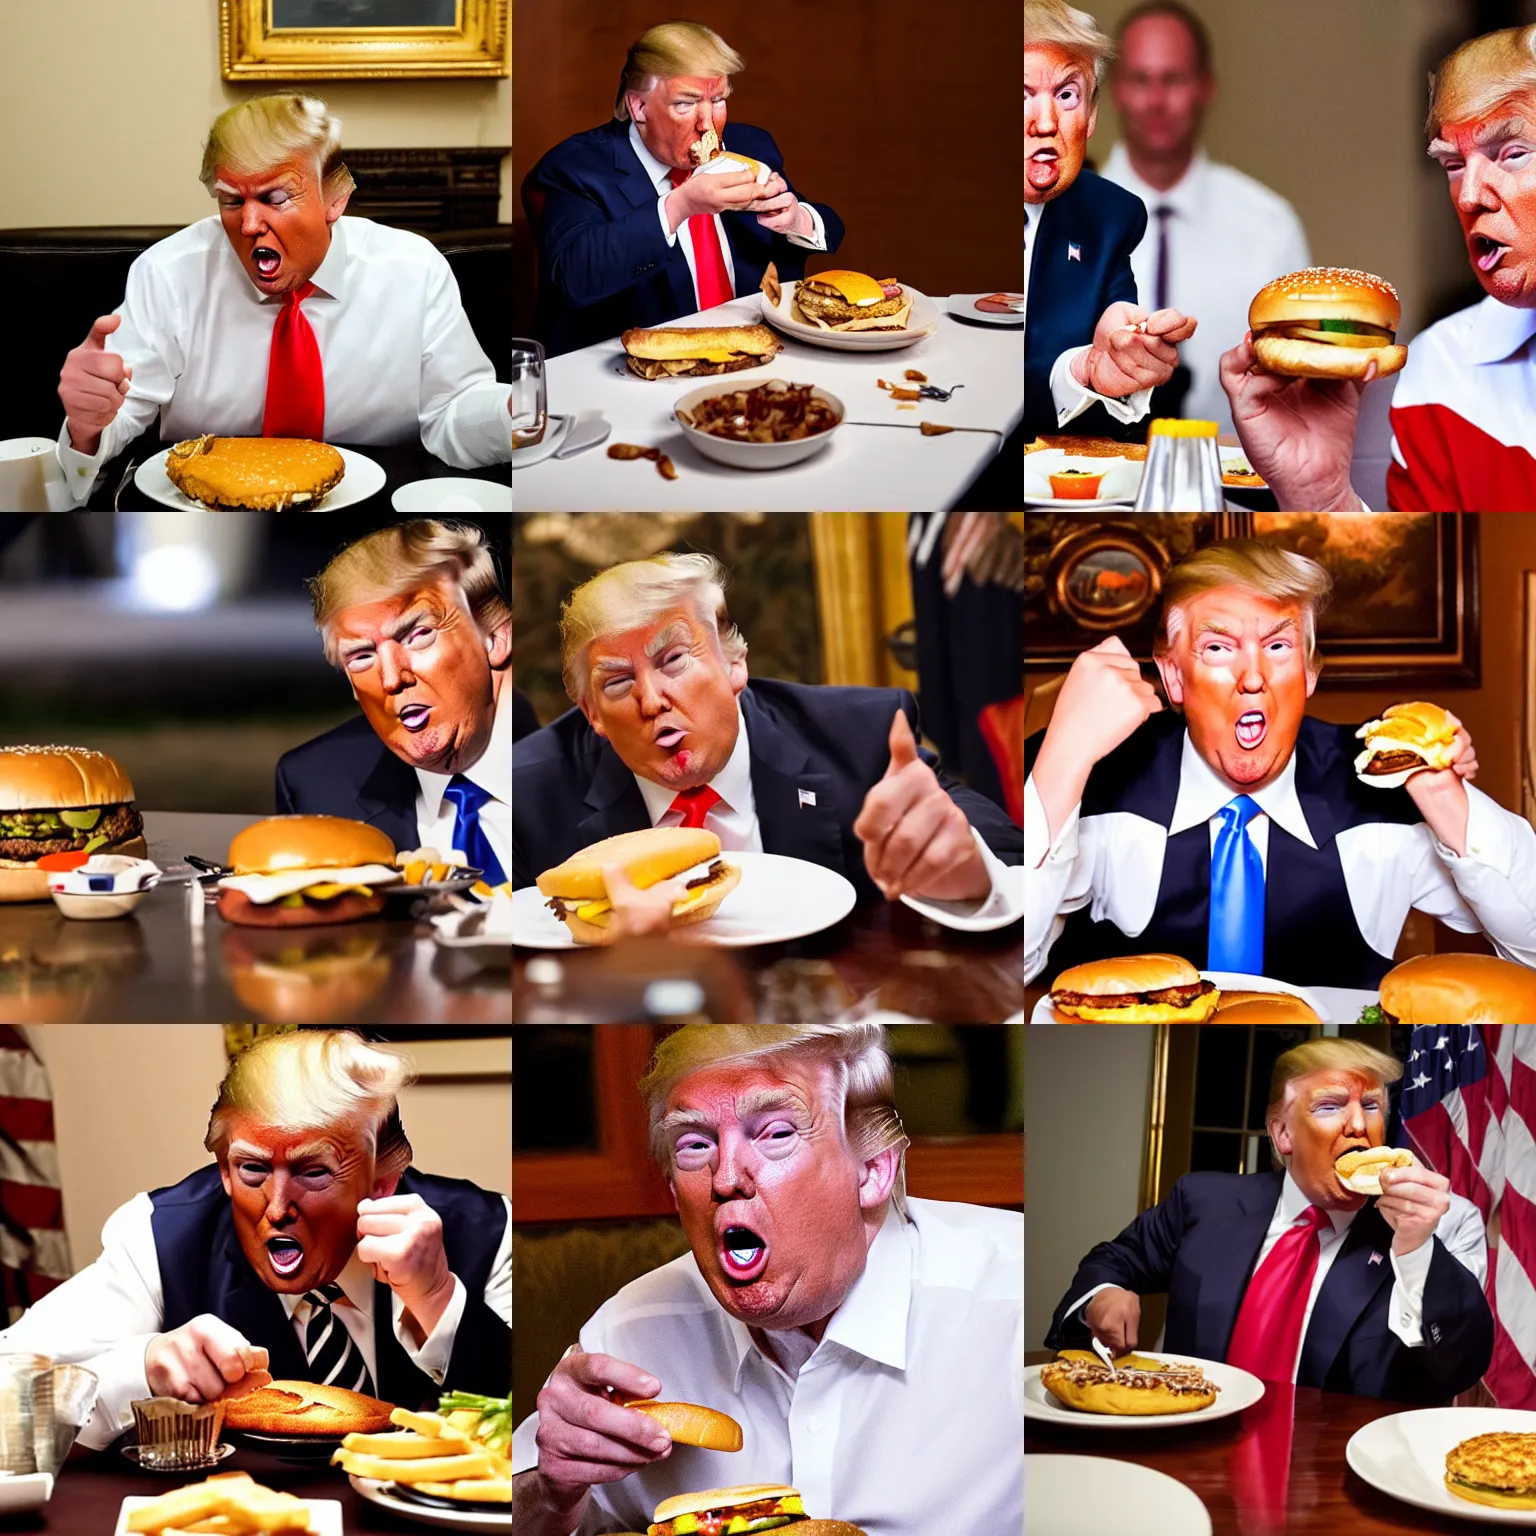 Prompt: donald trump eating a cheeseburger at a dinner table with his mouth wide open